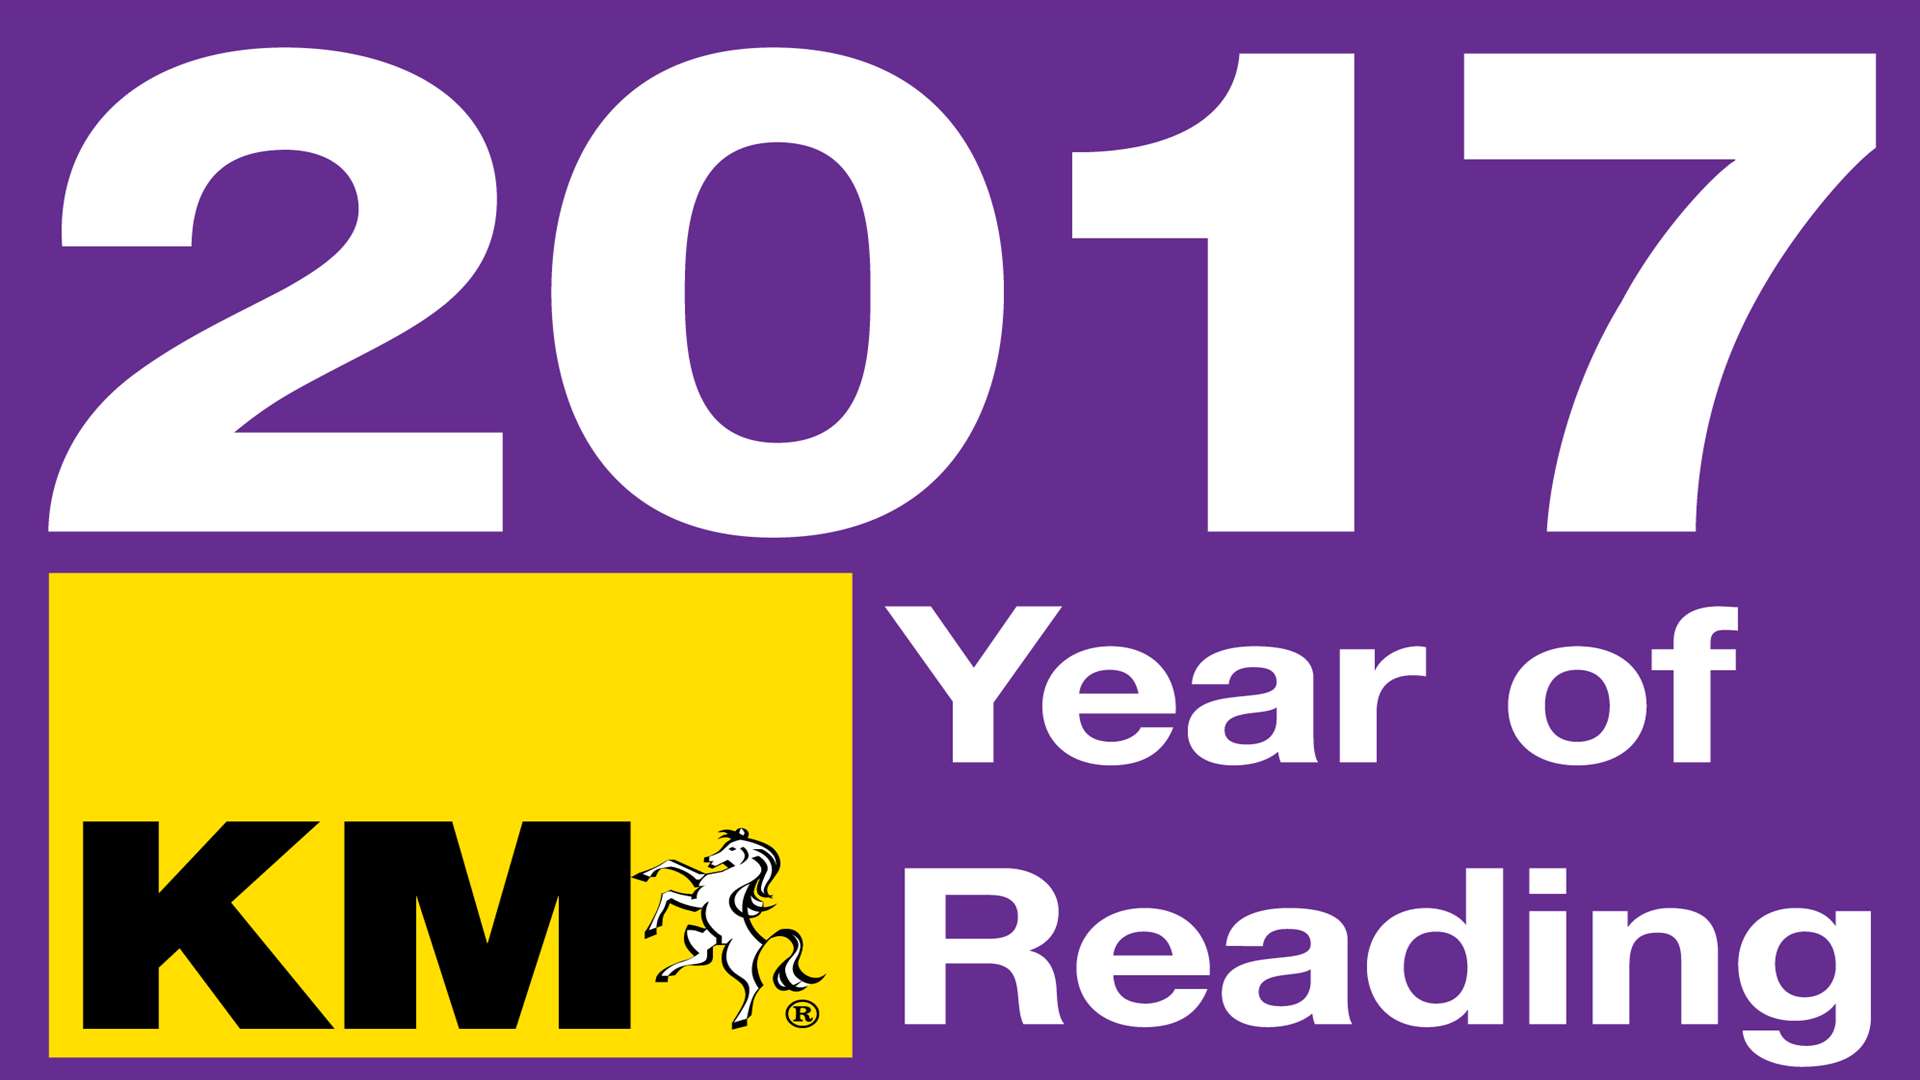 Literacy will be the integral focus in 2017 as KM's Year of Reading initiative gets underway.